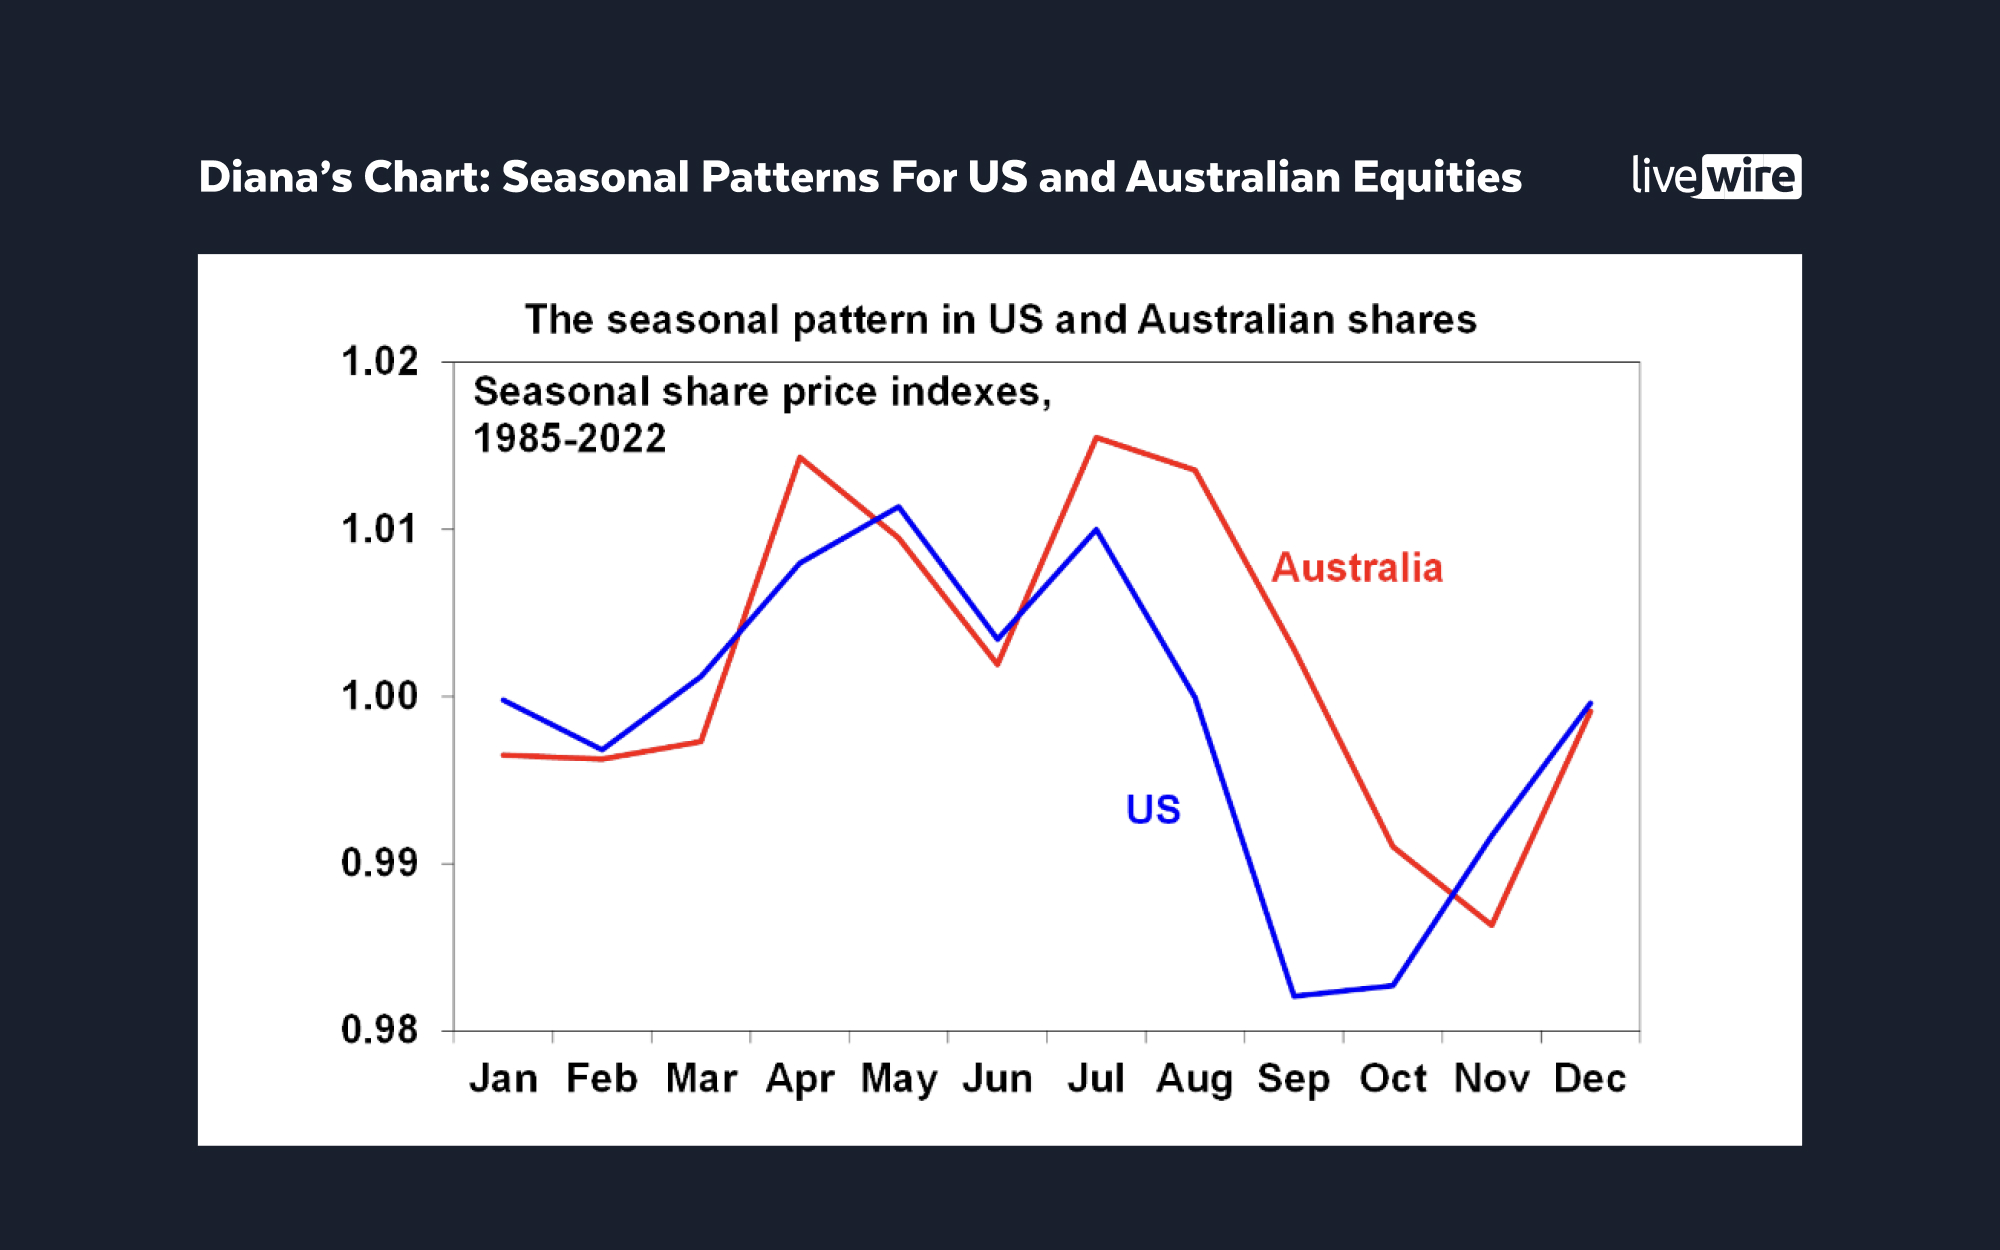 Dianas Chart Seasonal Patterns For US and Australian Equities